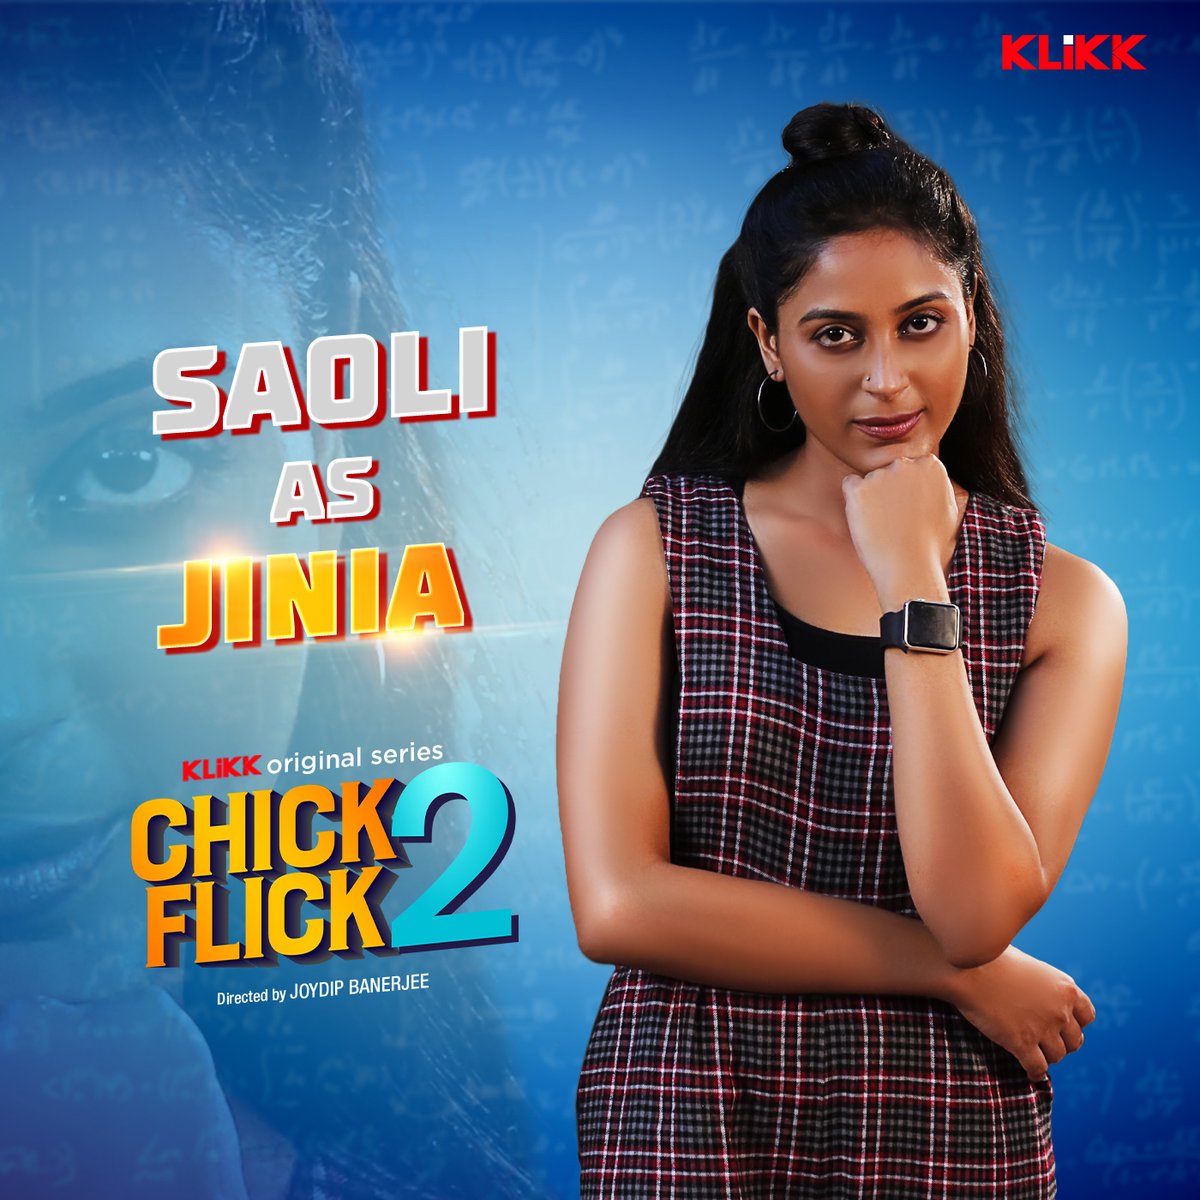 The girl who always thinks ahead of time and has a plan B ready for every situation, #SaoliChattopadhyay  is back as Jinia in Chick Flick 2  - A KLiKK Original Series by @JoydipB50792882 | Streaming 29 November 
#ChickFlick2 #abkibardhoomdhoomar #Klikk #BinodonJokhonTokhon